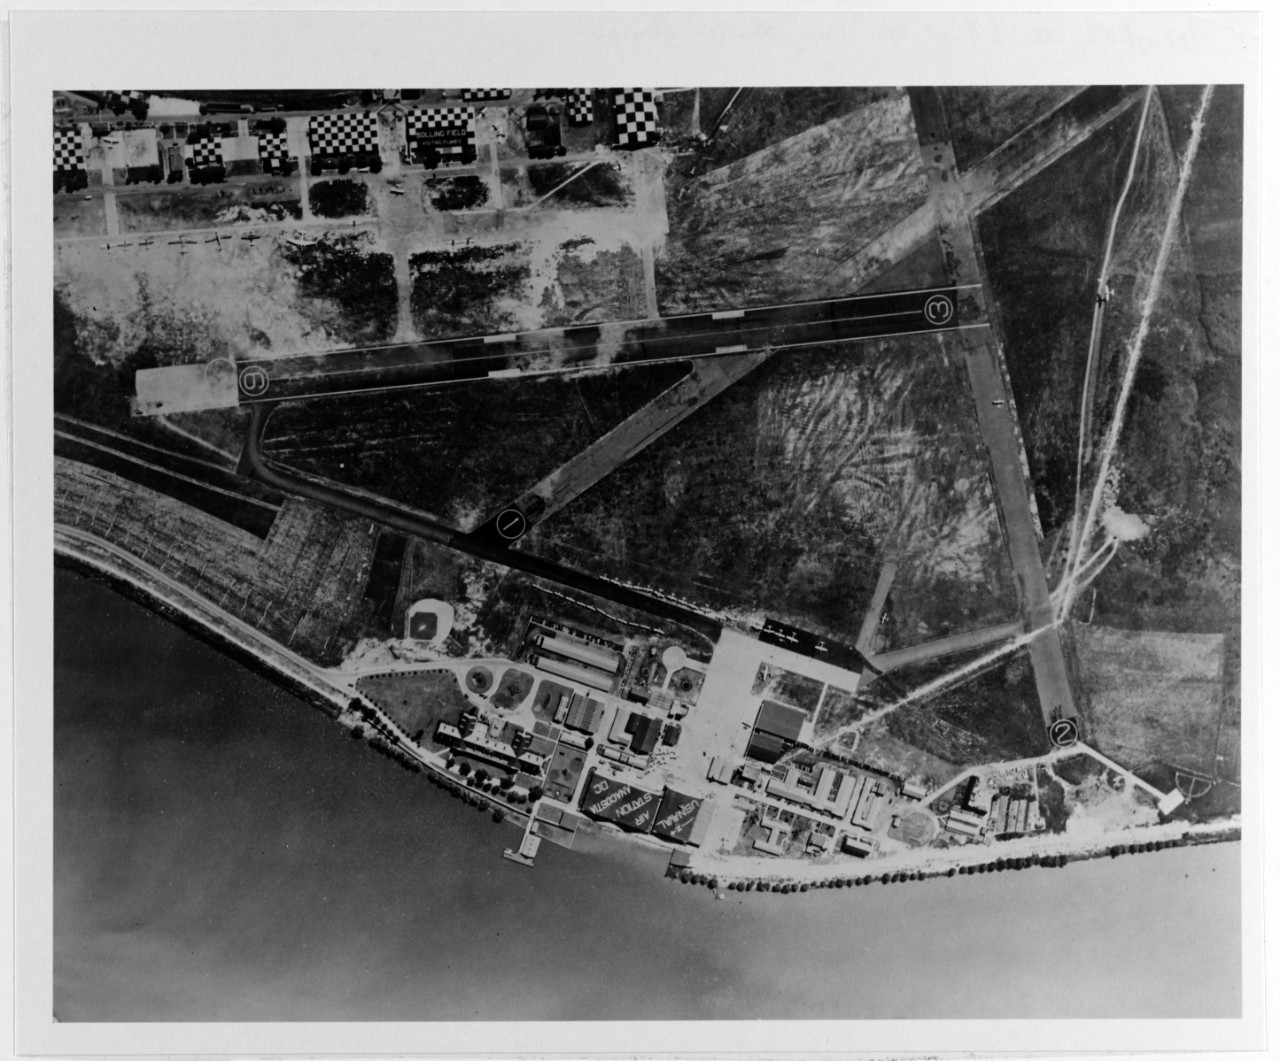 Naval Air Station (NAS) Anacostia and Bolling USAAC Field